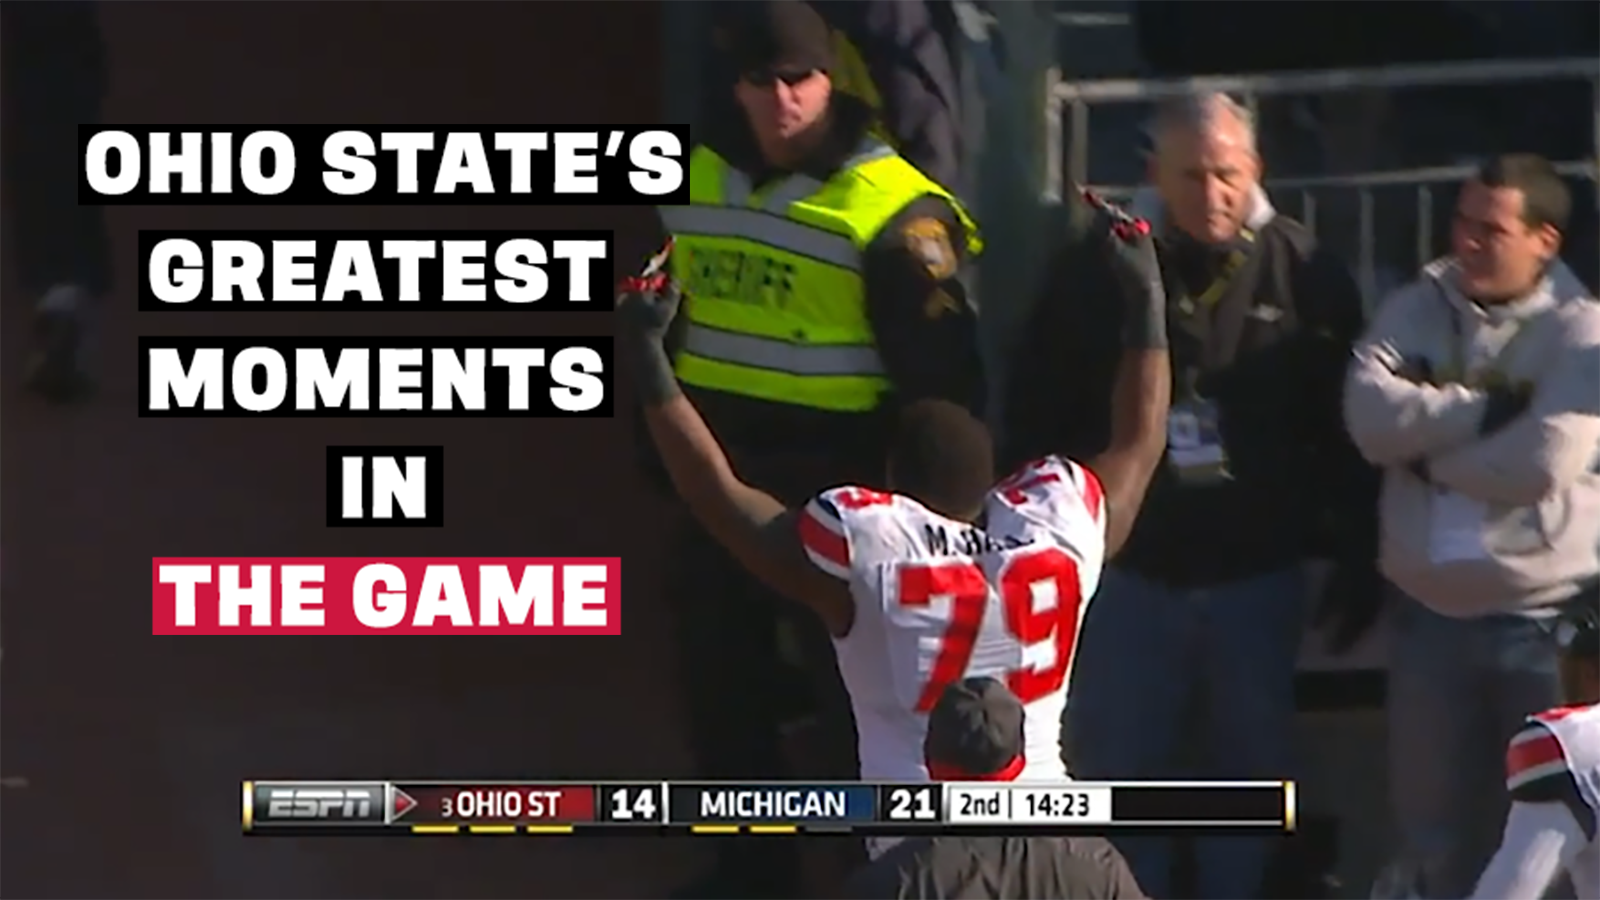 Video: Ohio State's Greatest Moments in The Game